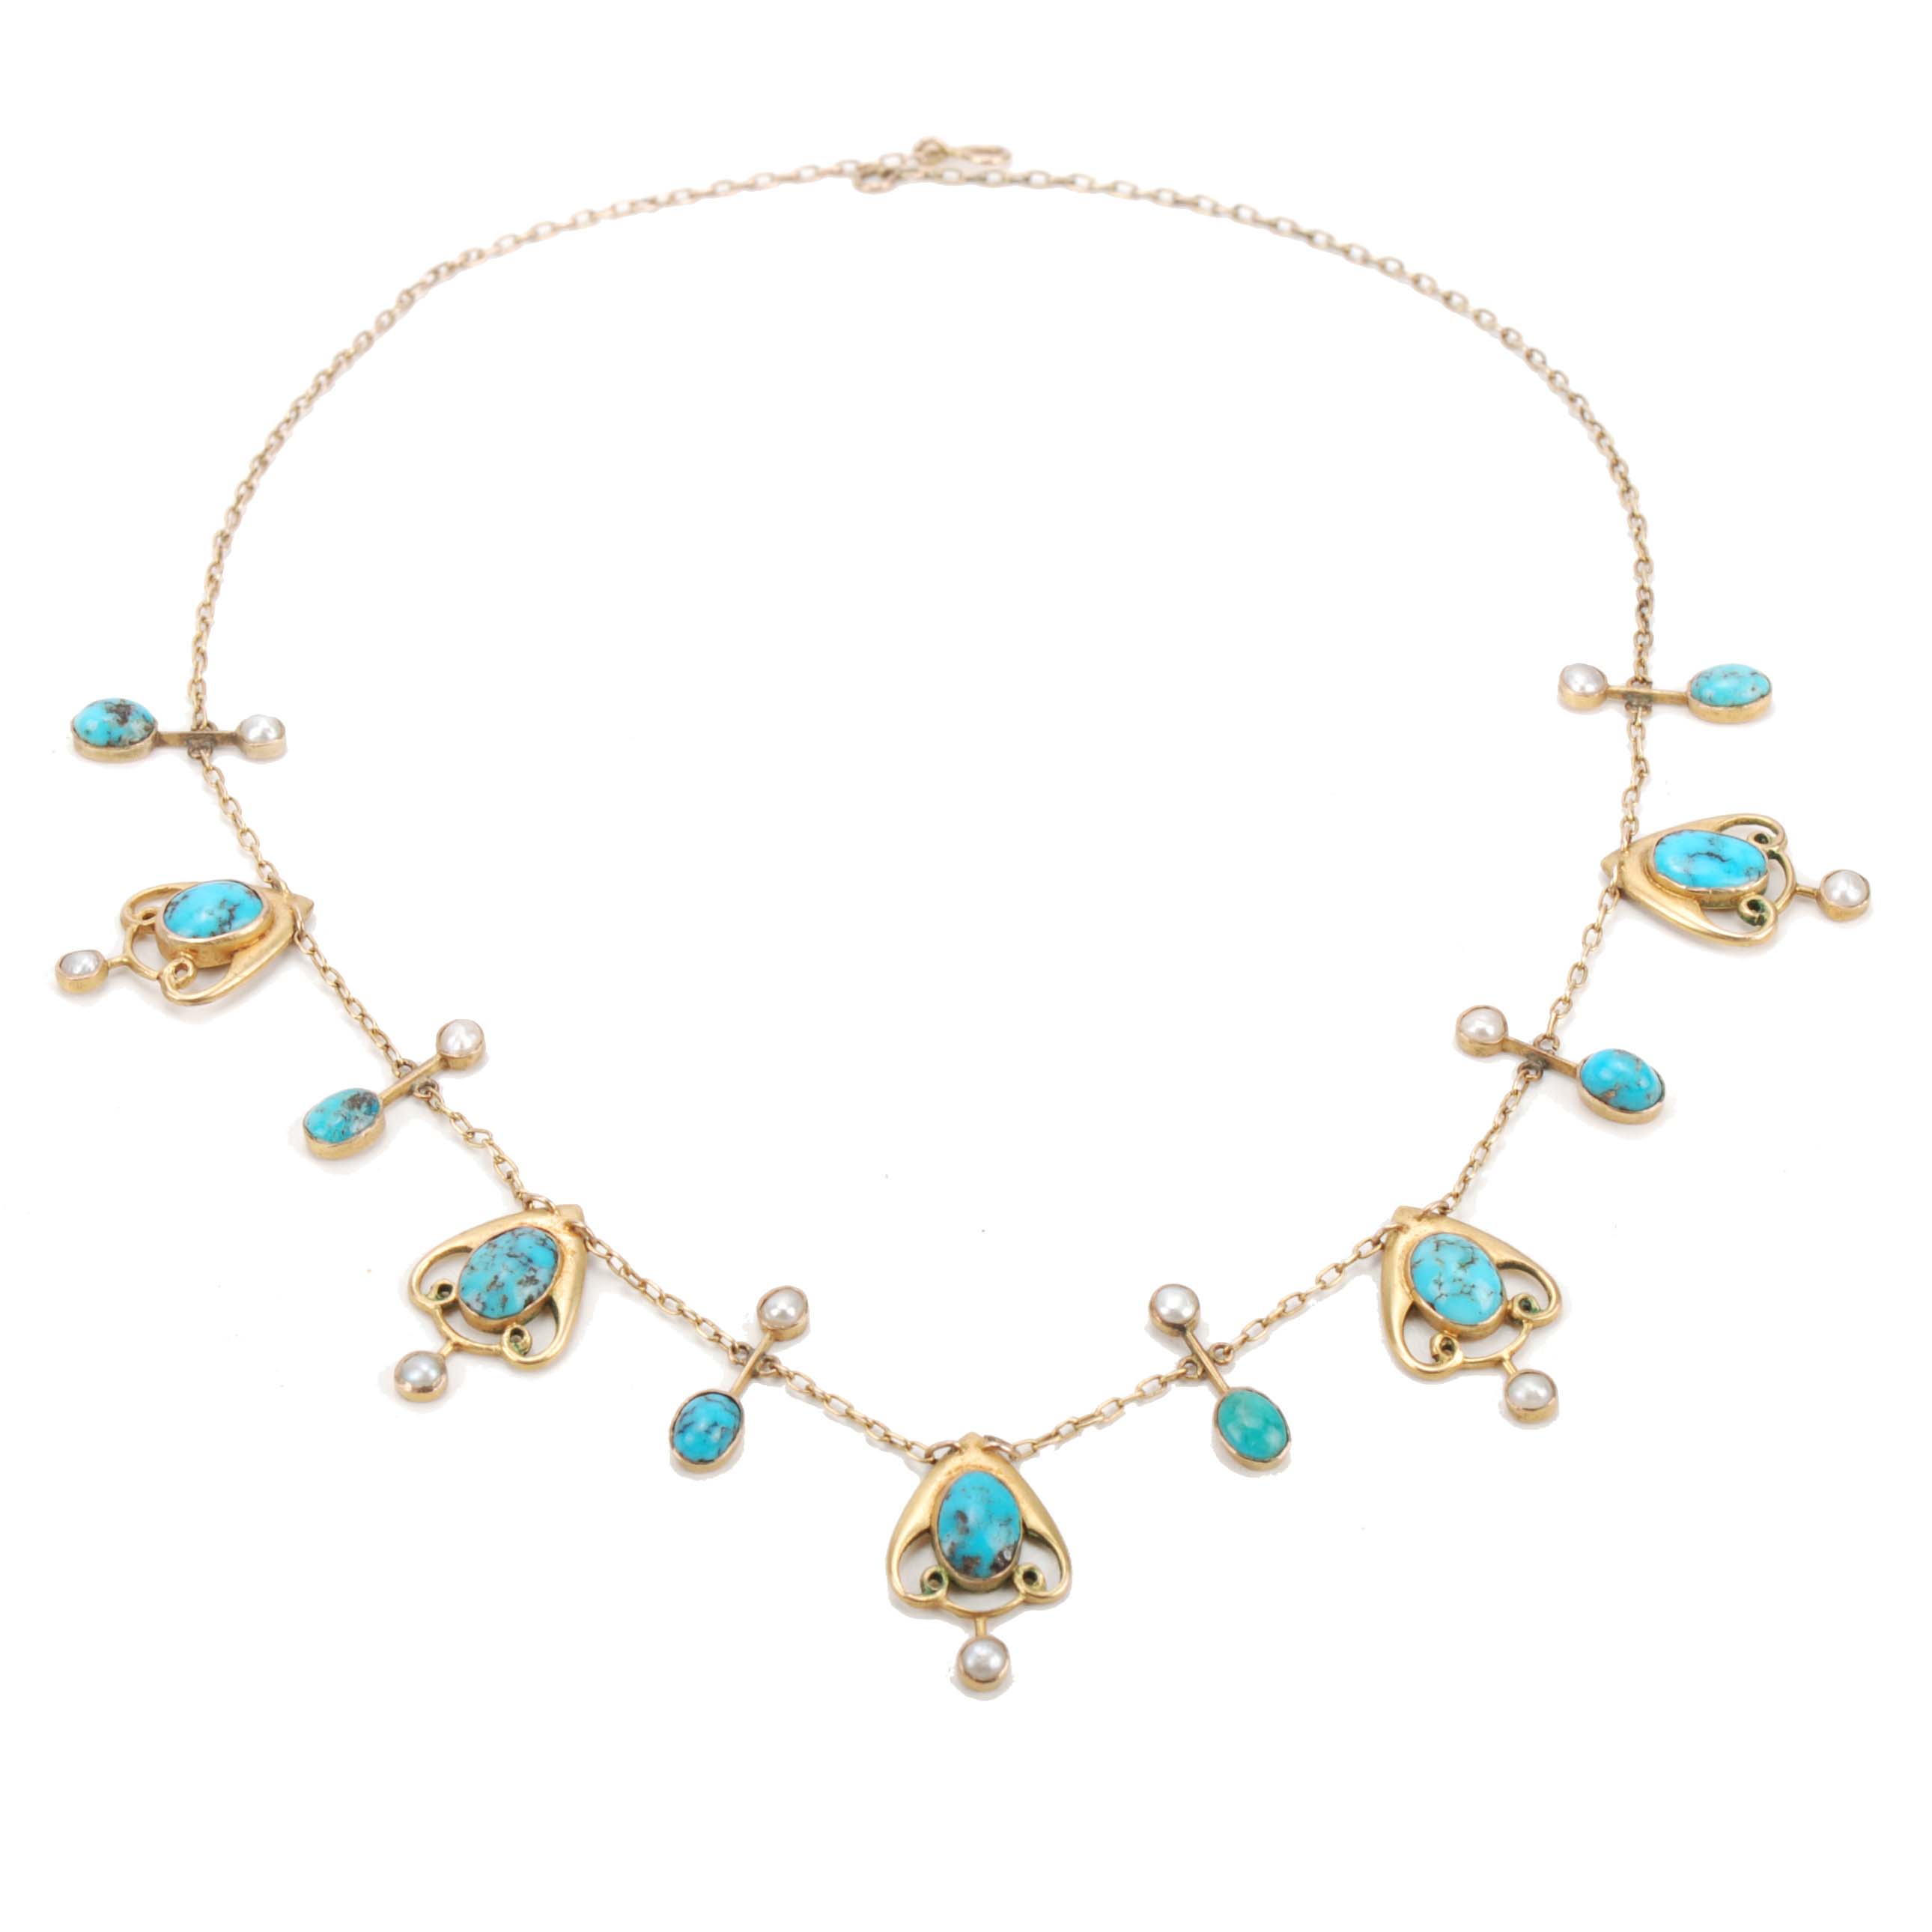 GOLD AND TURQUOISES NECKLACE.